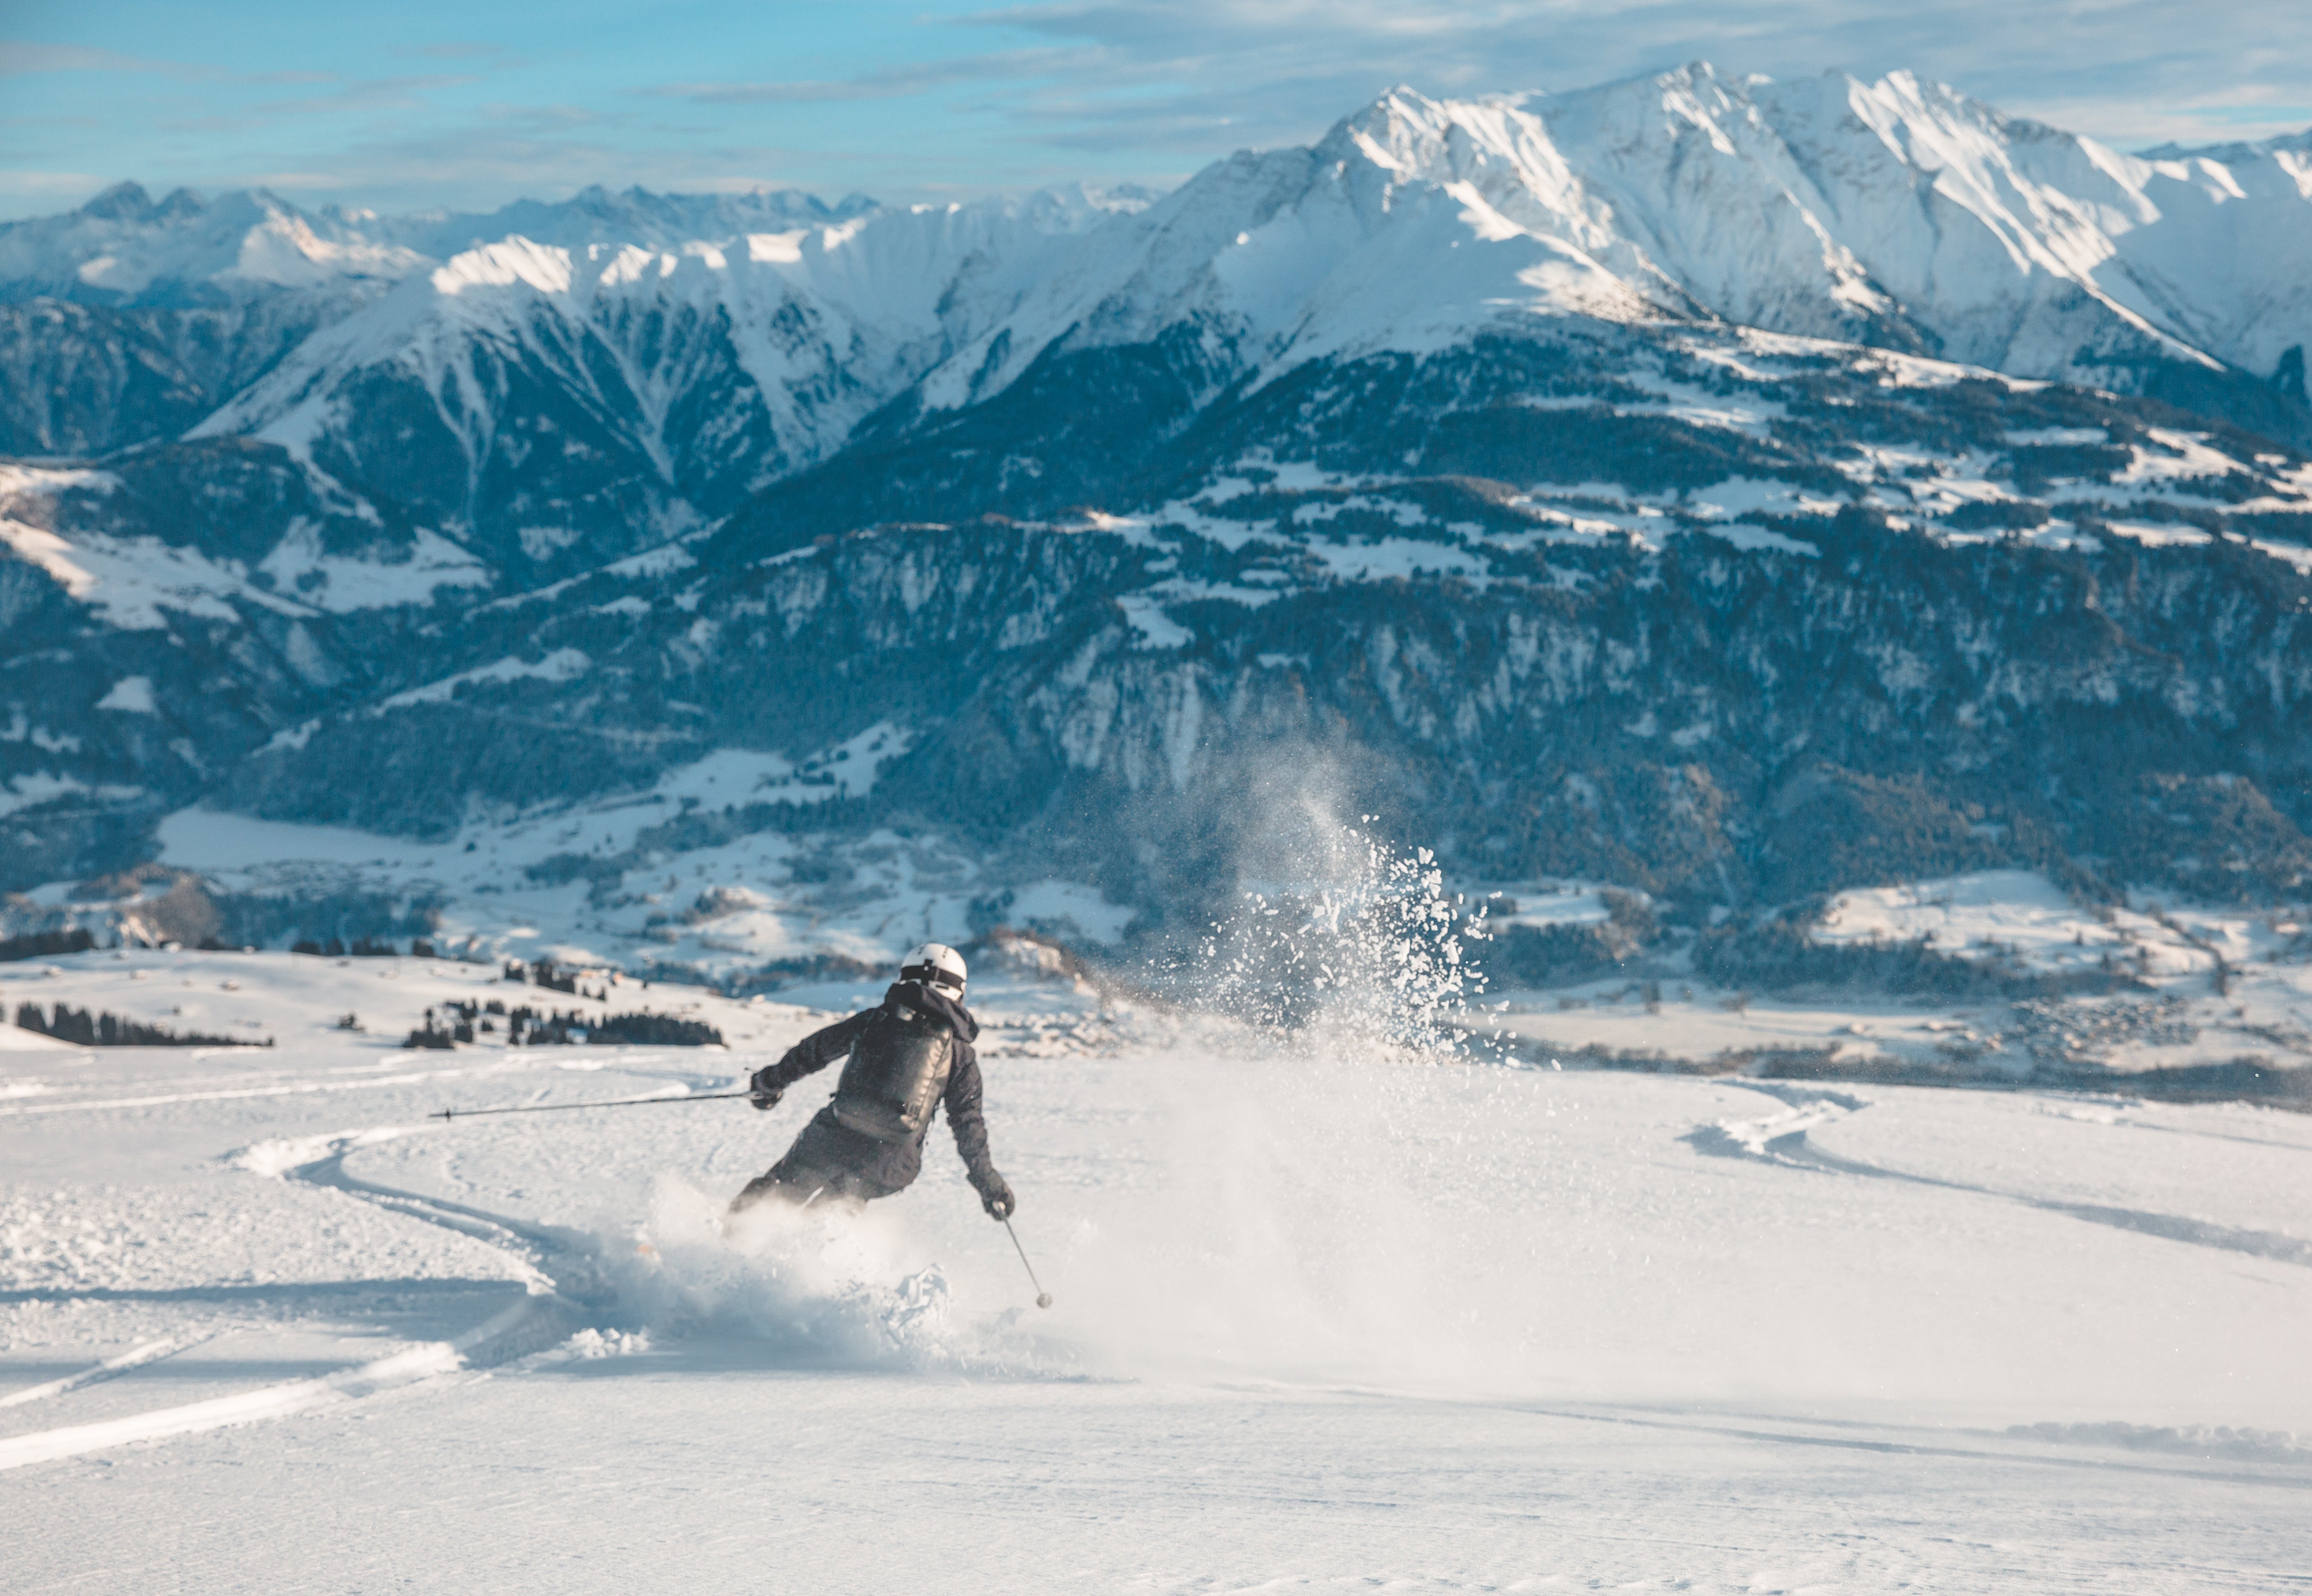 Find the freedom to explore the slopes during a singles ski holiday